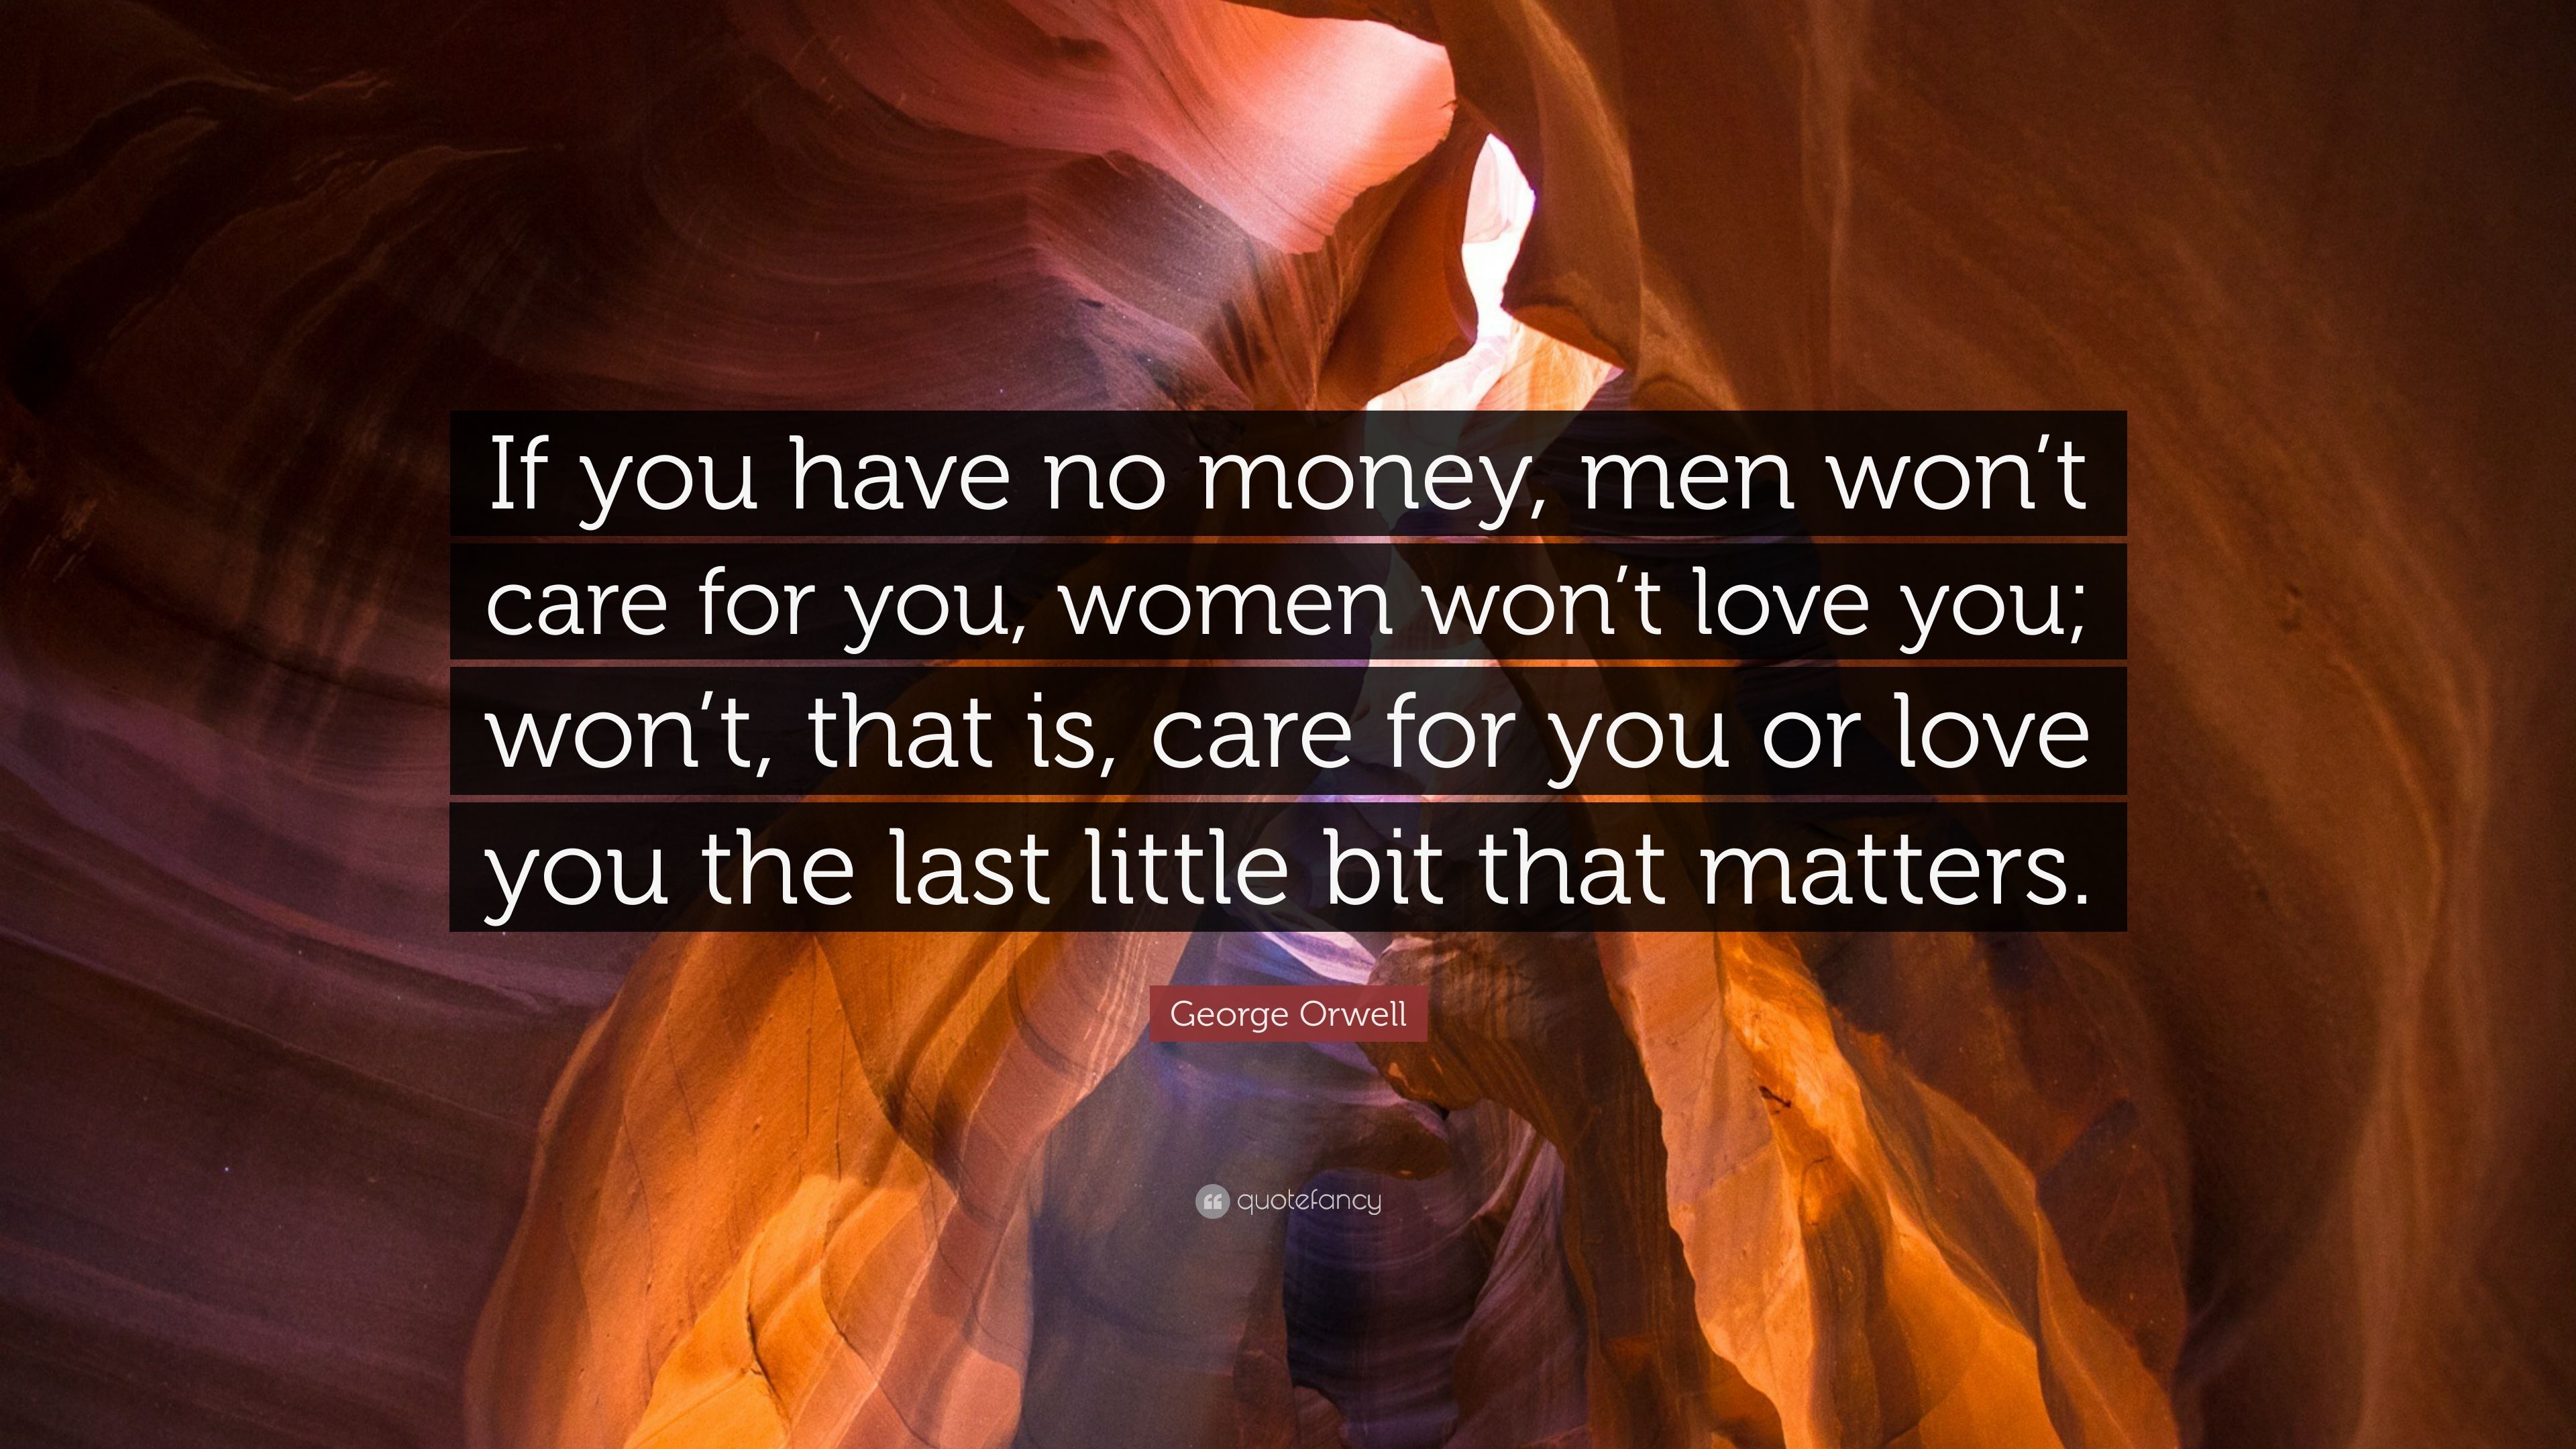 George Orwell Quote: “If you have no money, men won't care for you